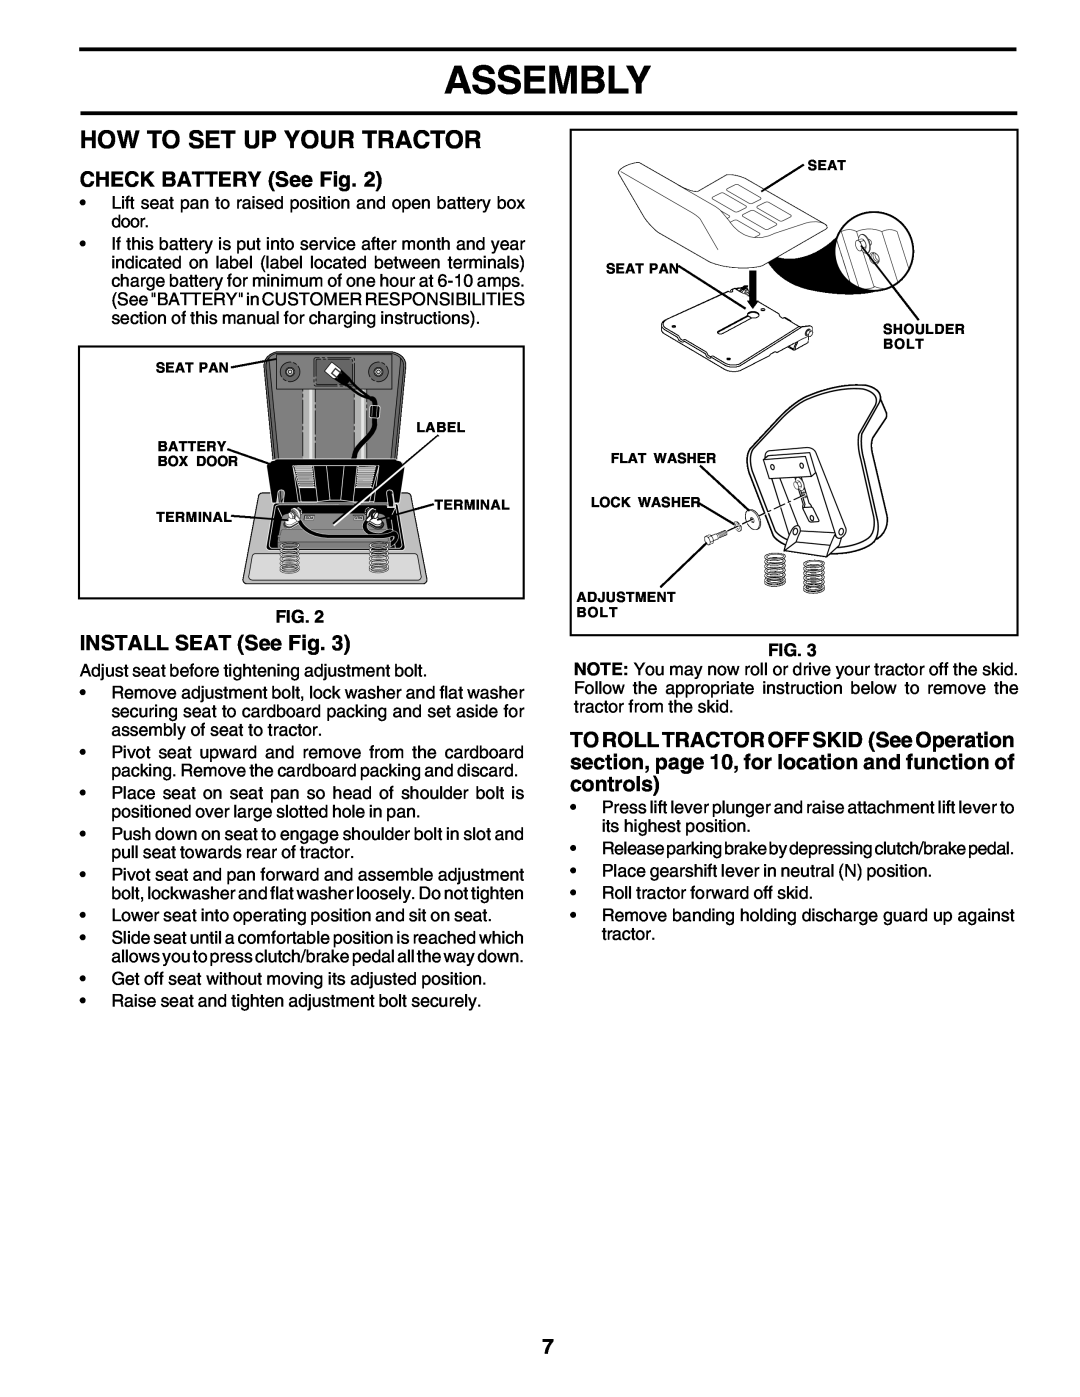 Poulan PO14542B owner manual How To Set Up Your Tractor, CHECK BATTERY See Fig, INSTALL SEAT See Fig, Assembly 